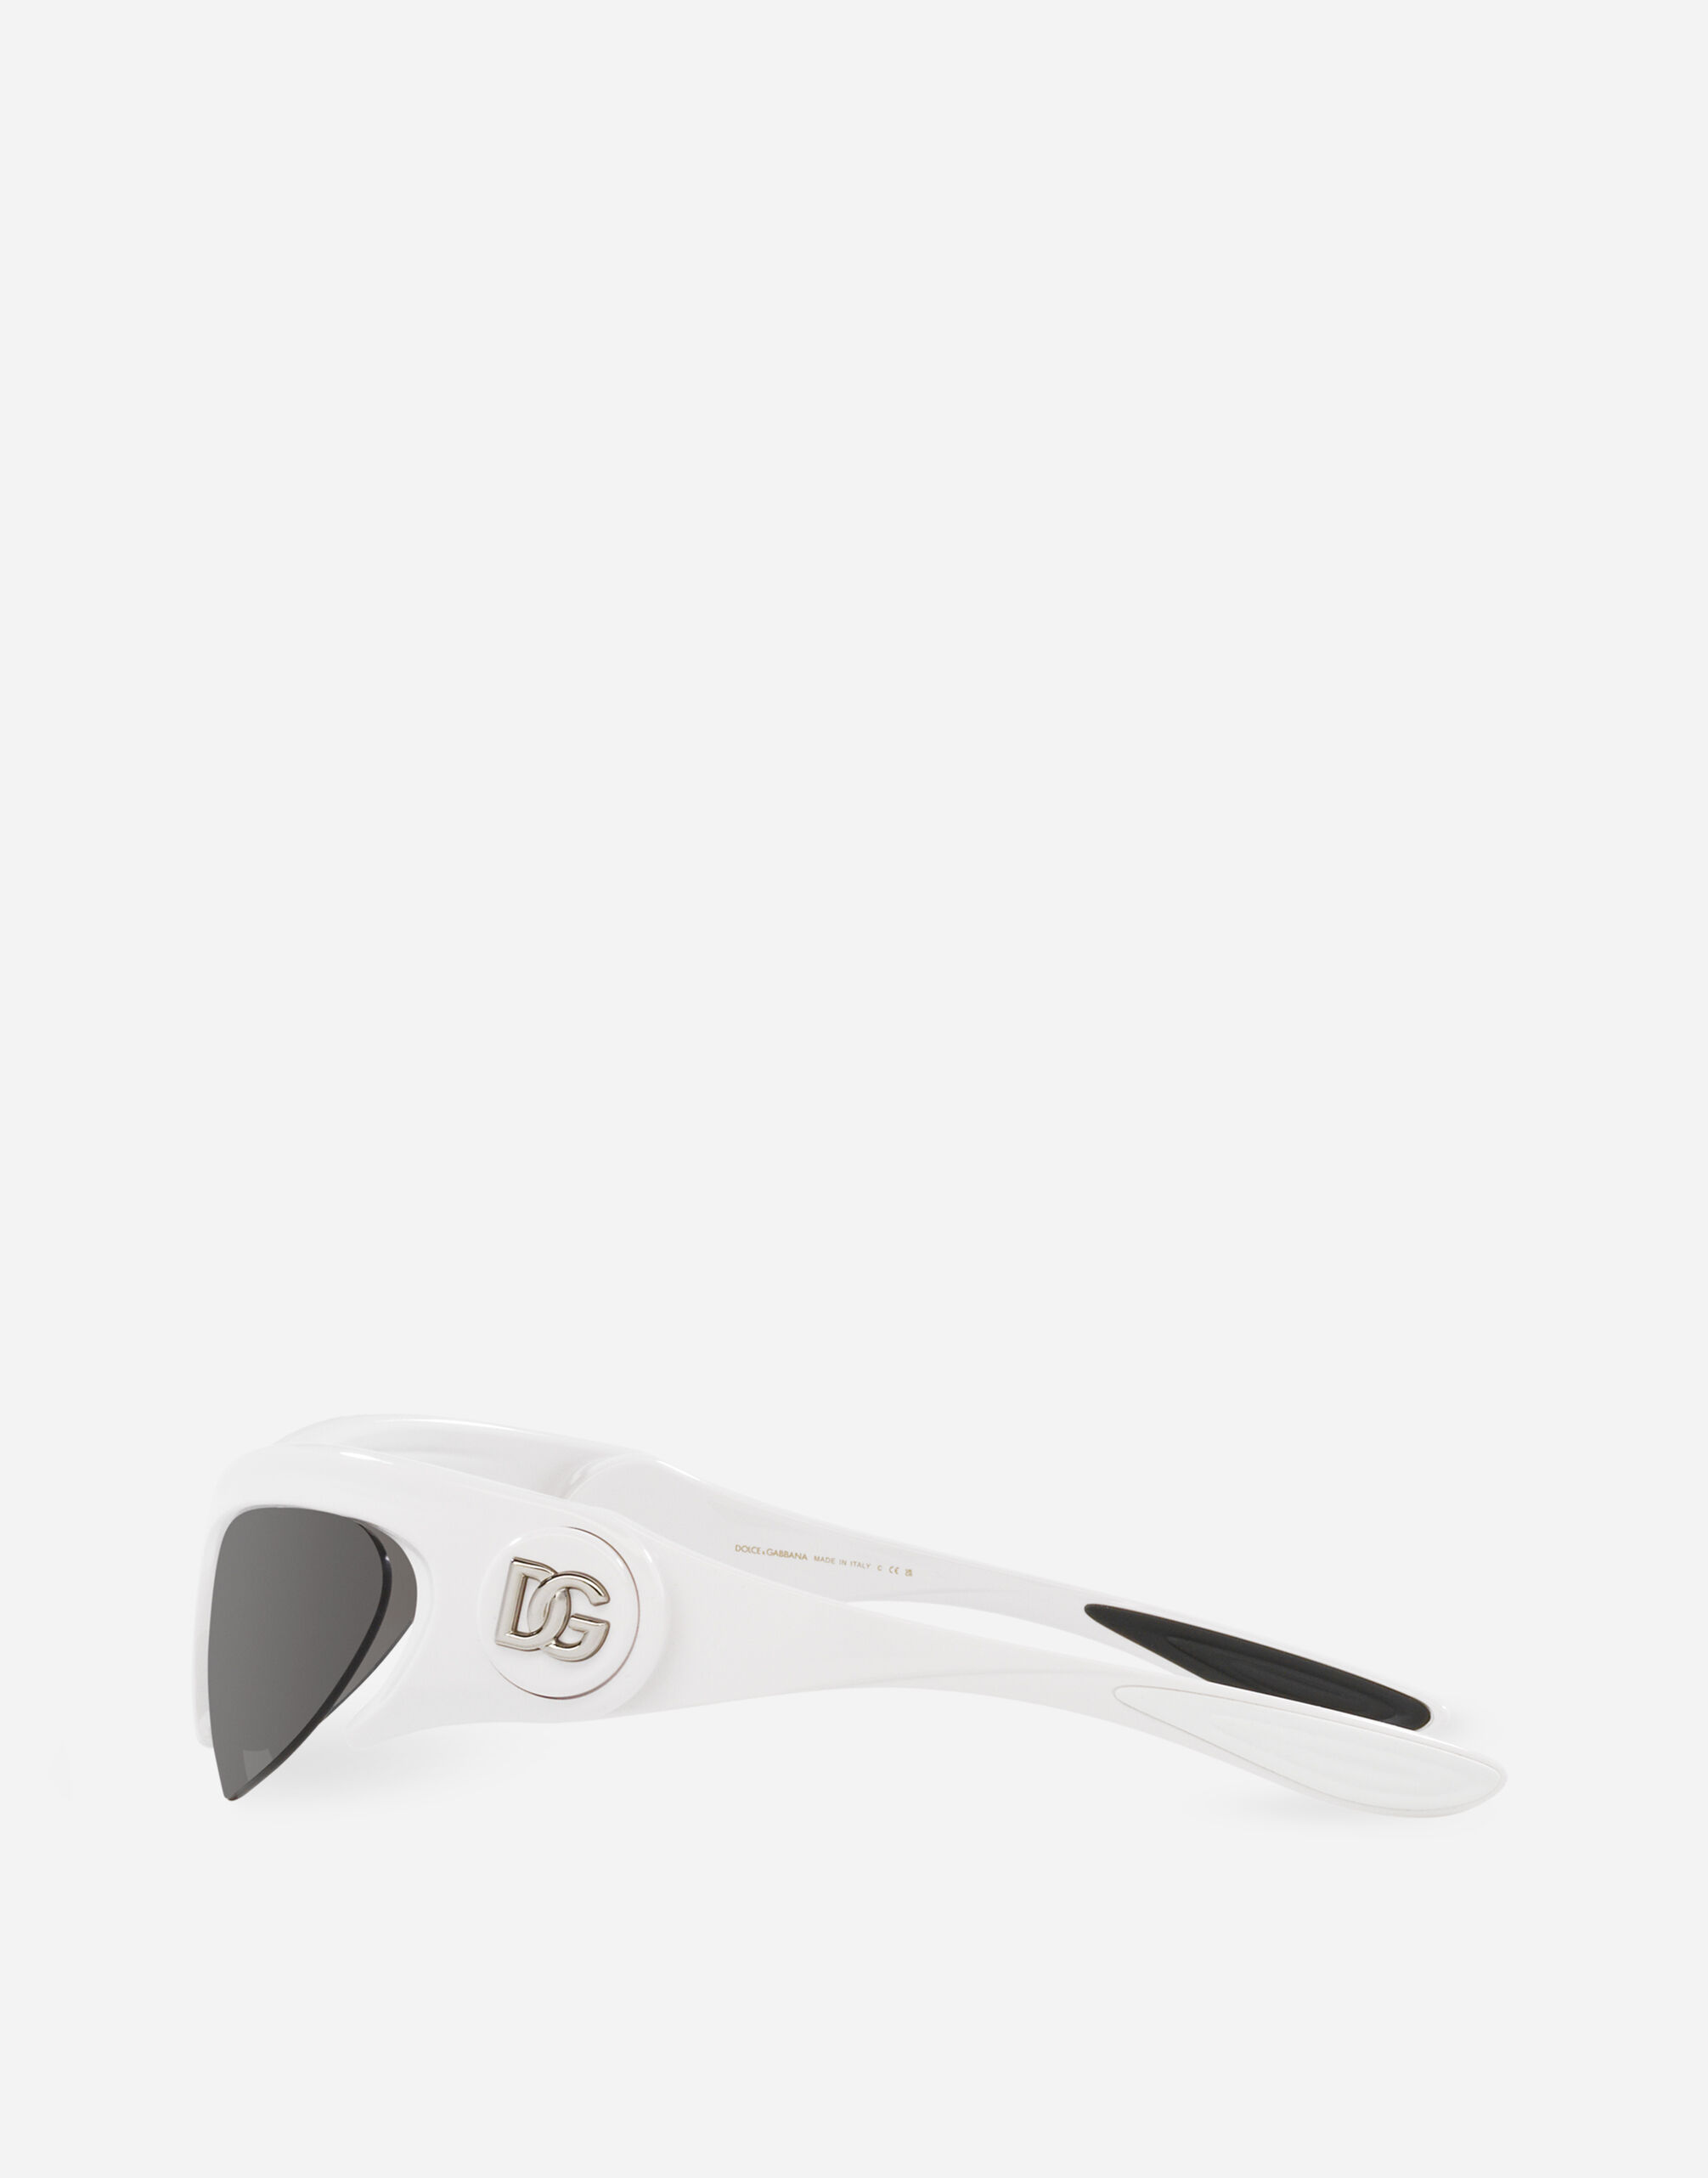 DG Toy sunglasses in White for | Dolce&Gabbana® US